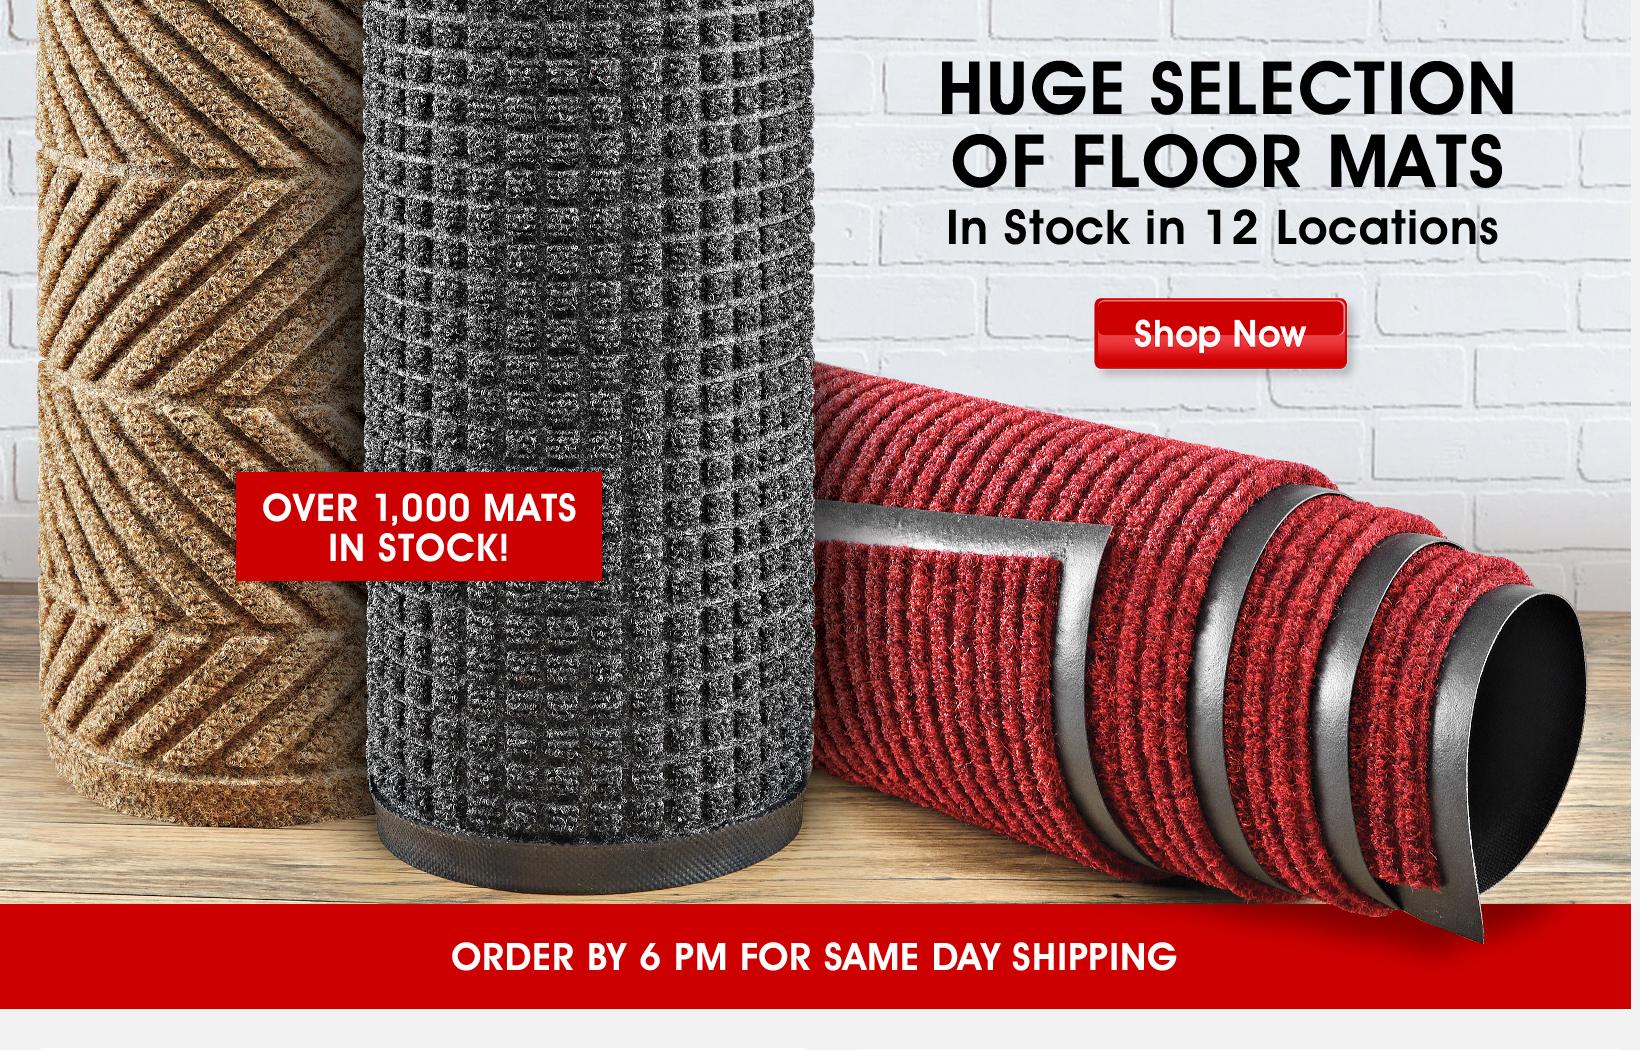 Huge Selection
of Floor Mats - Shop Now - OVER 1,000 MATS ALWAYS IN STOCK! – ORDER BY 6 PM FOR SAME DAY SHIPPING